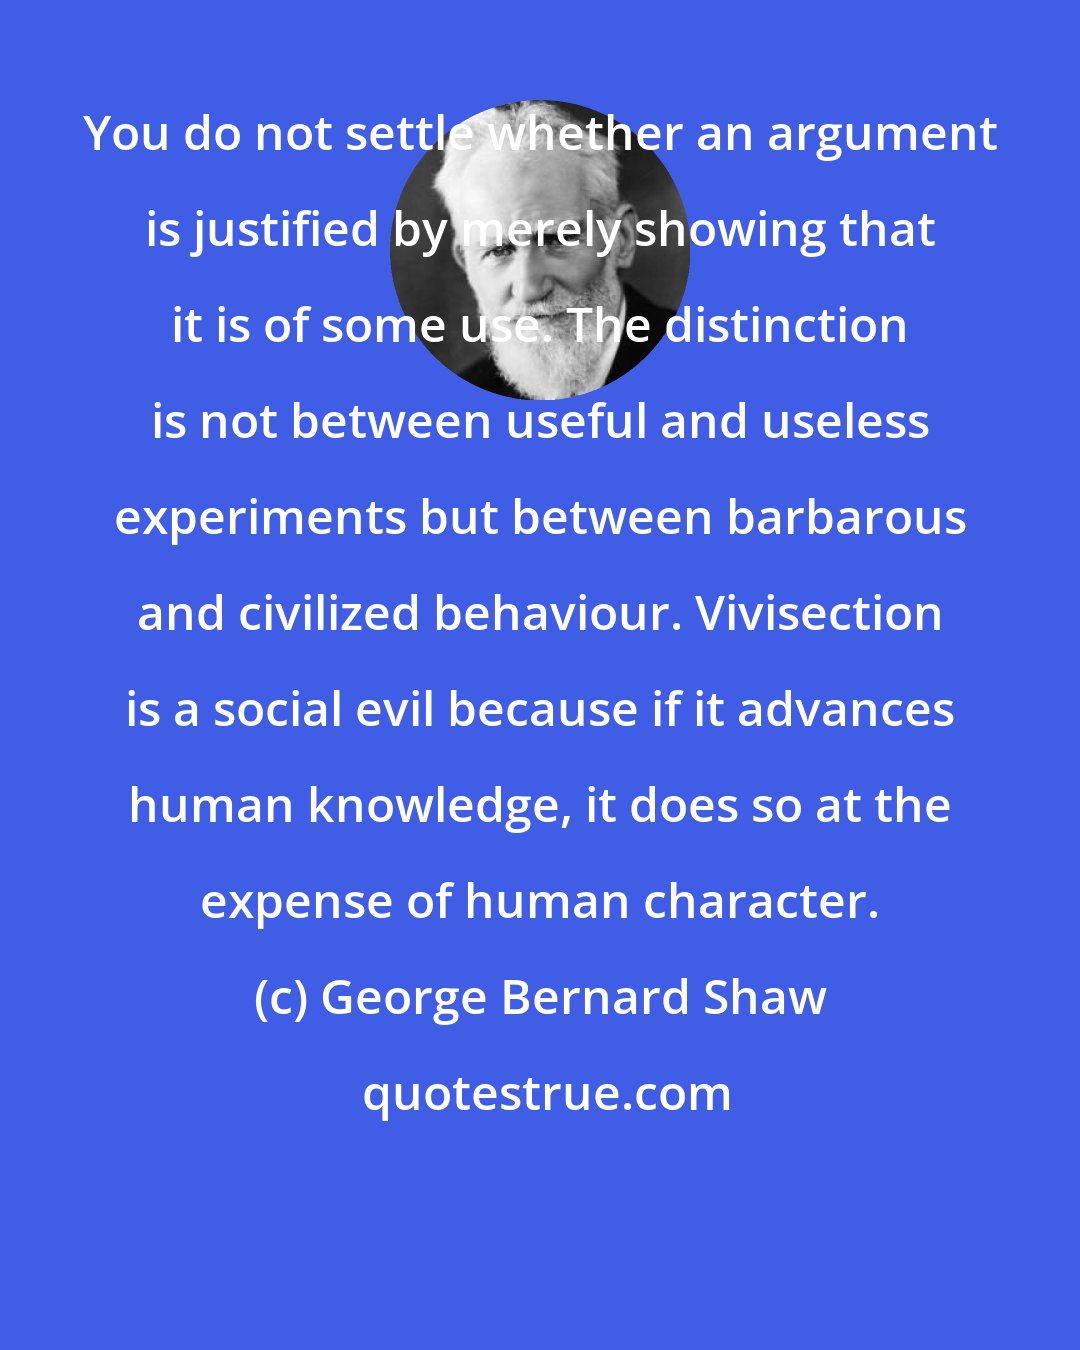 George Bernard Shaw: You do not settle whether an argument is justified by merely showing that it is of some use. The distinction is not between useful and useless experiments but between barbarous and civilized behaviour. Vivisection is a social evil because if it advances human knowledge, it does so at the expense of human character.